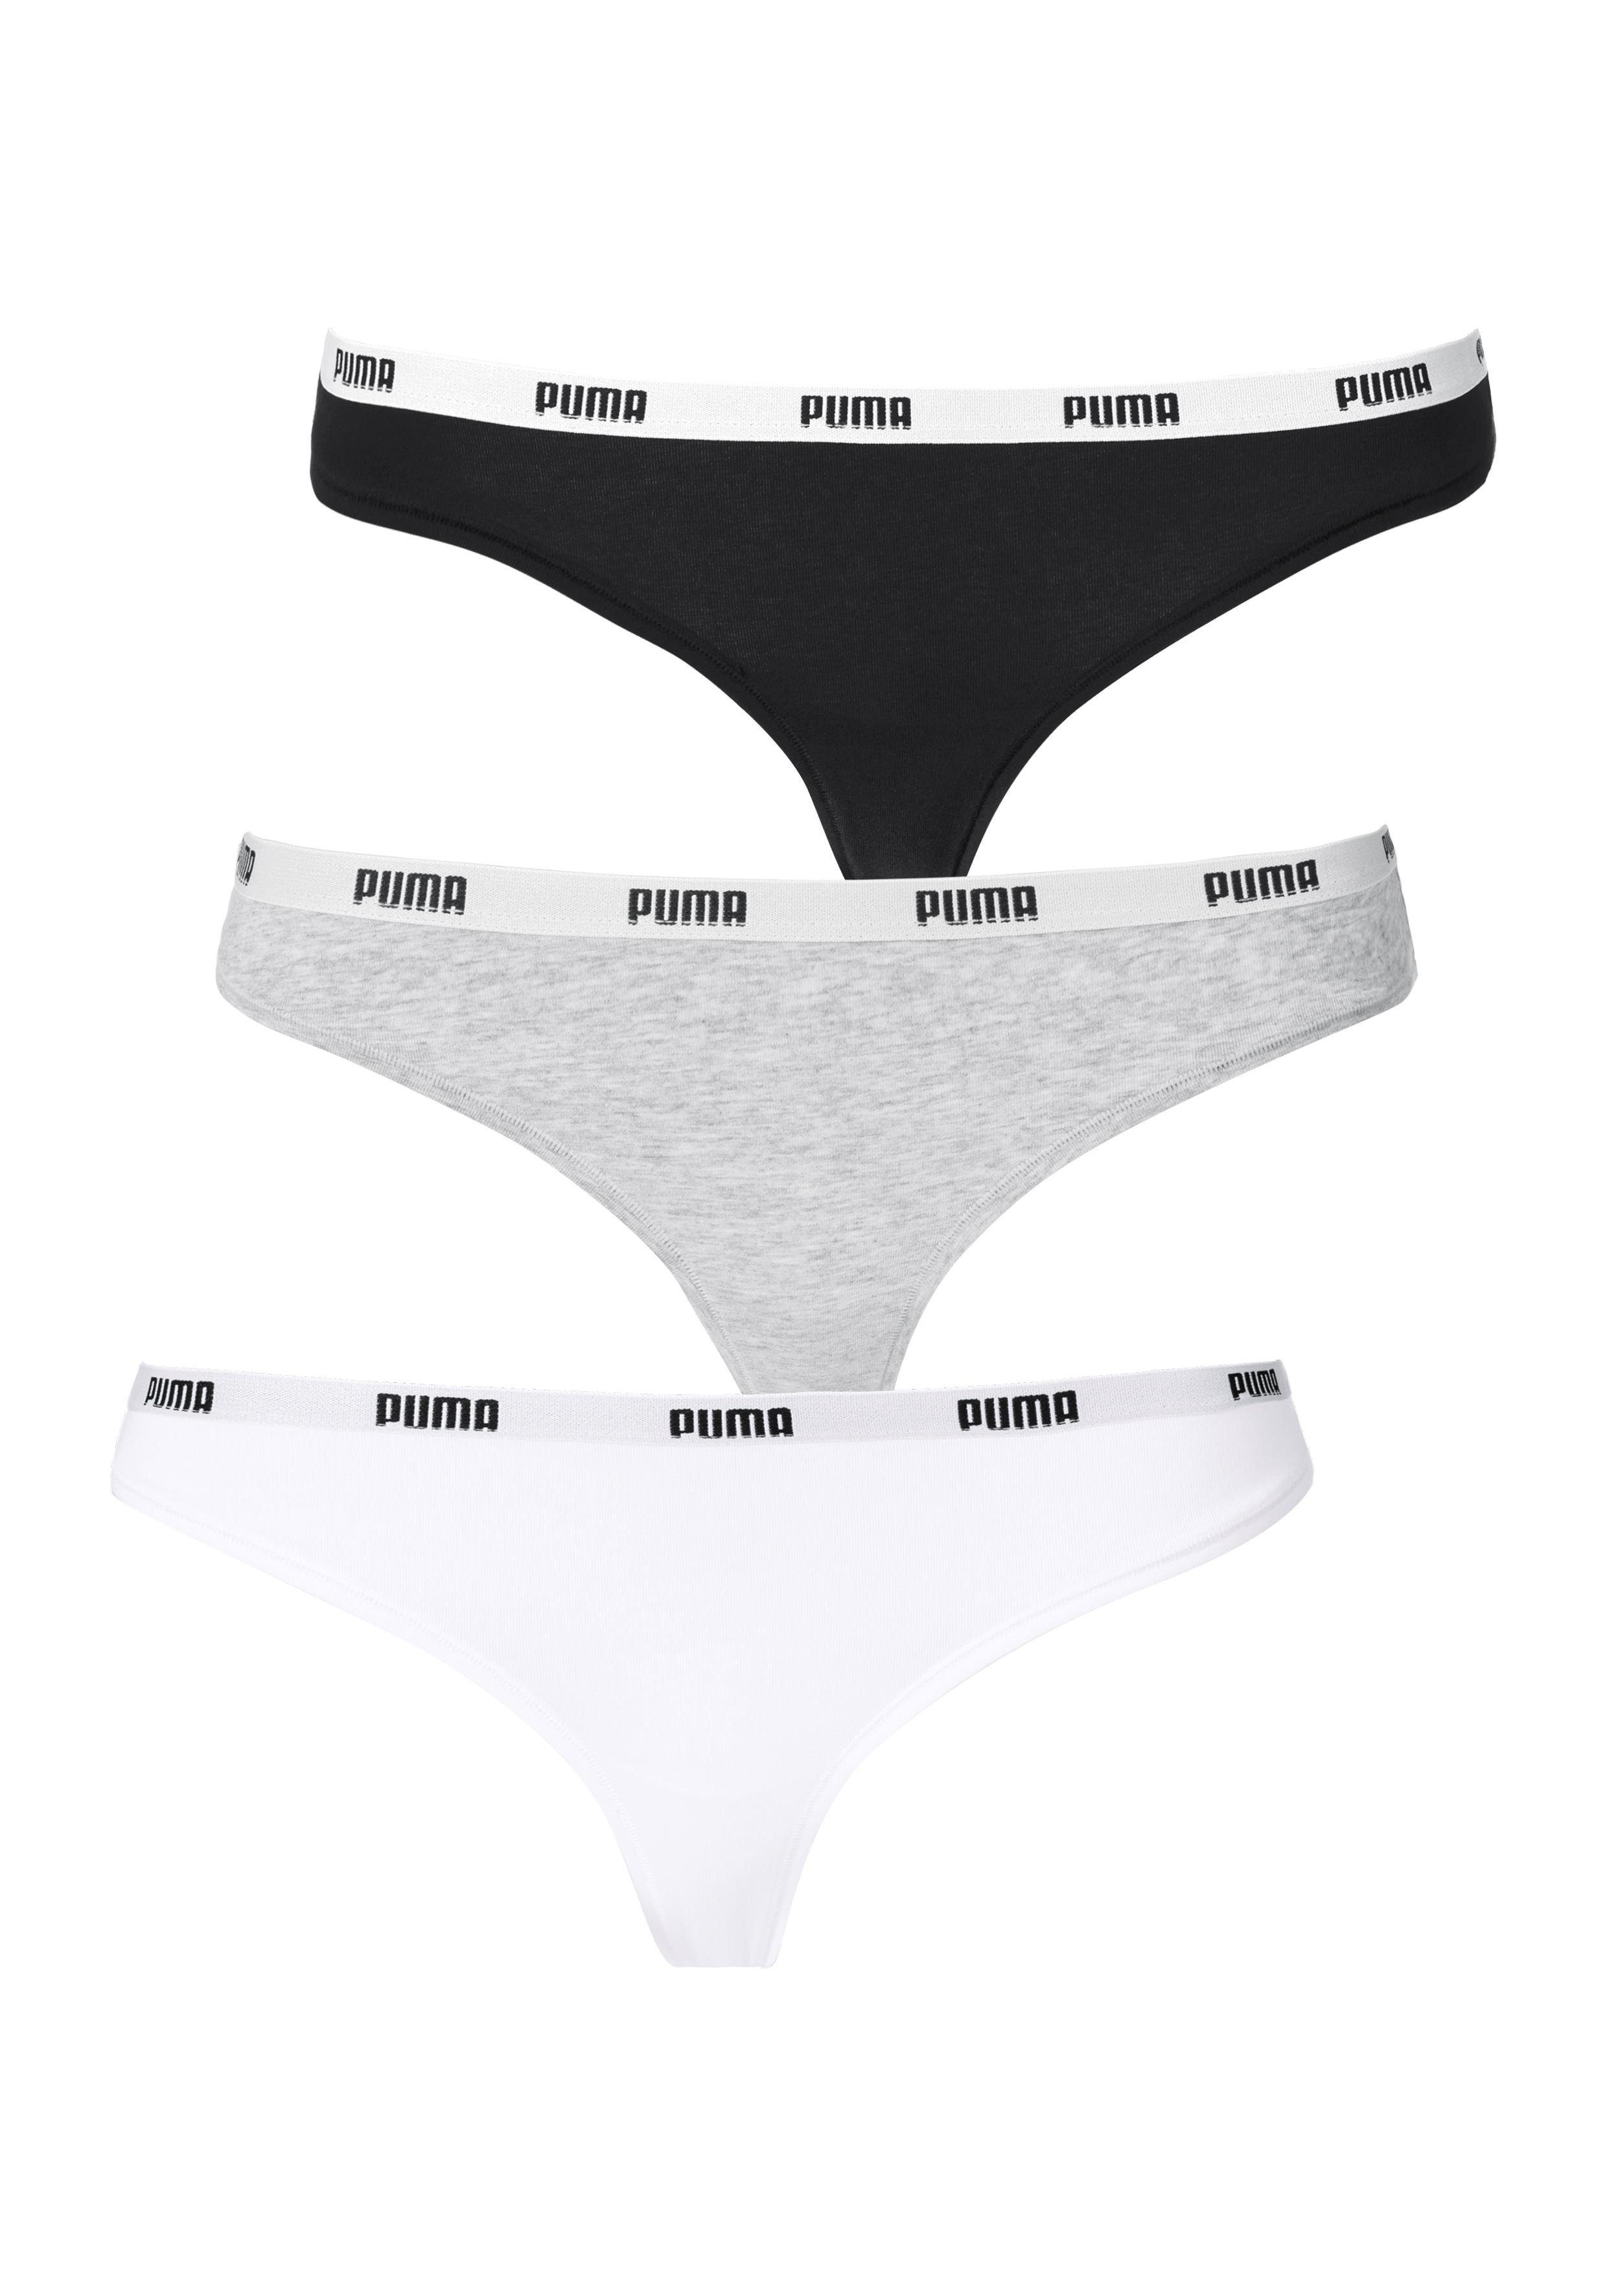 PUMA 3-St) String (Packung,